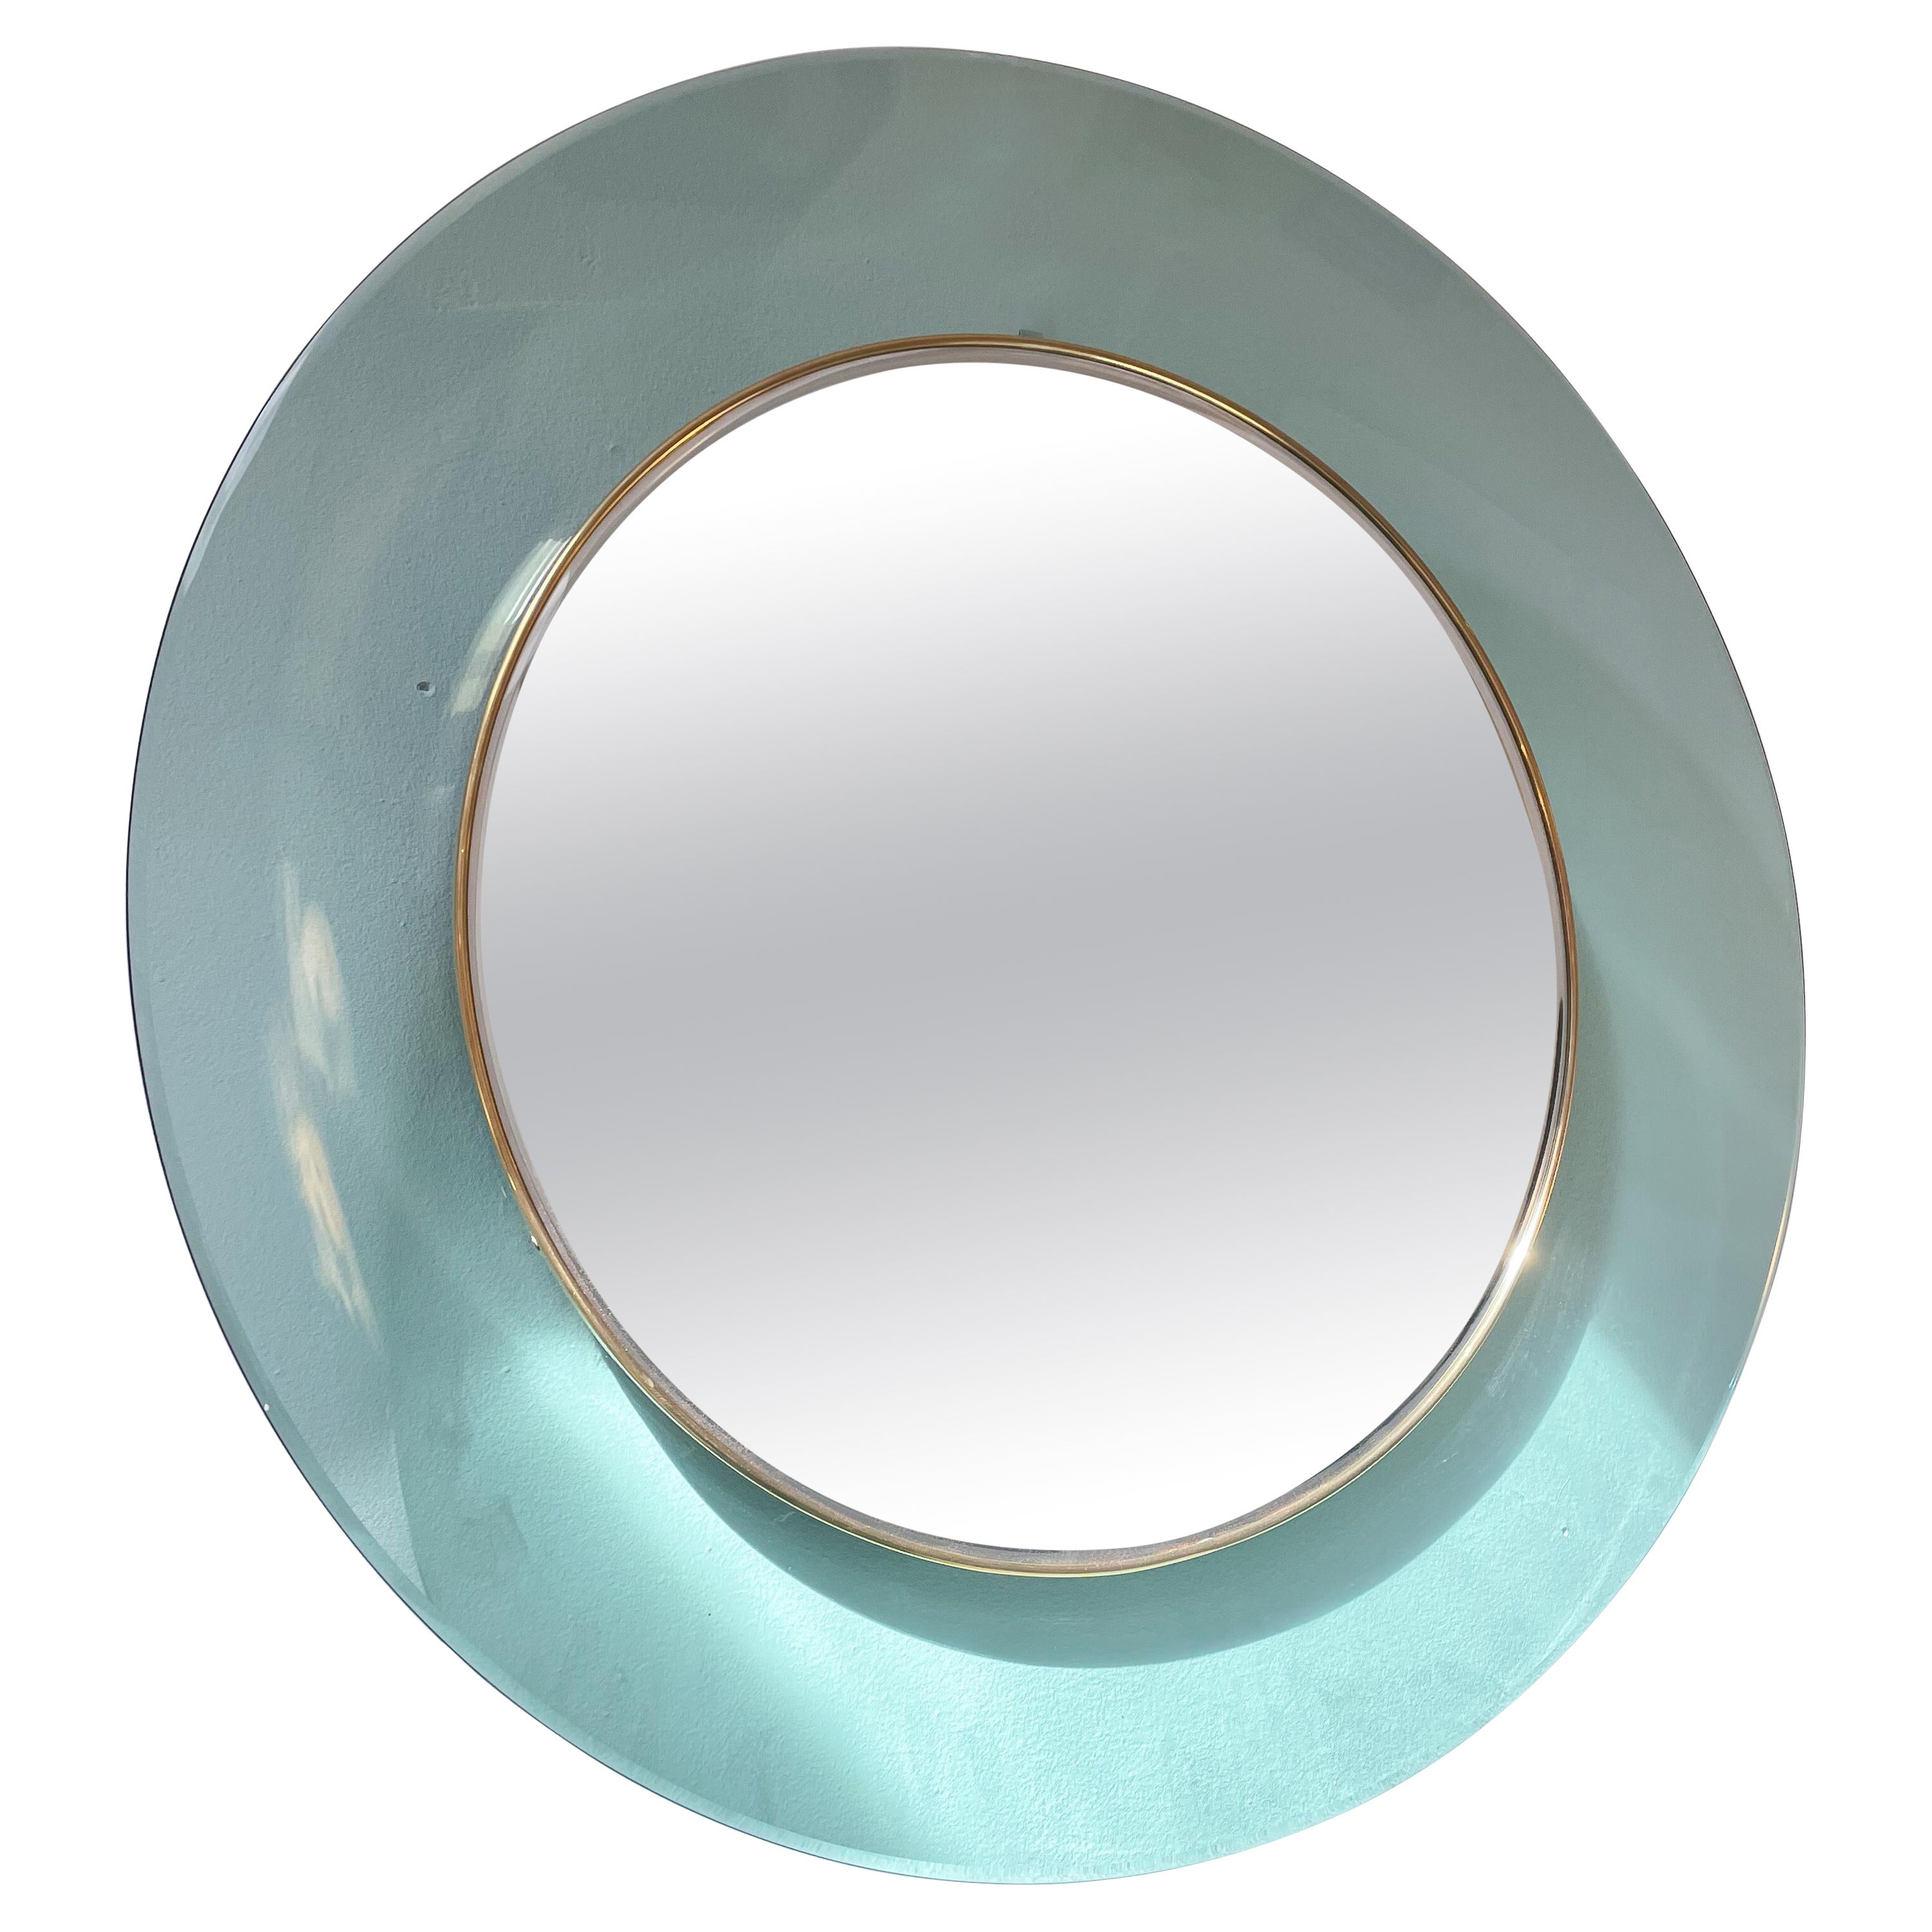 Mid-Century Modern Round Fontana Arte Mirror by Max Ingrand, Italy, 1960s For Sale